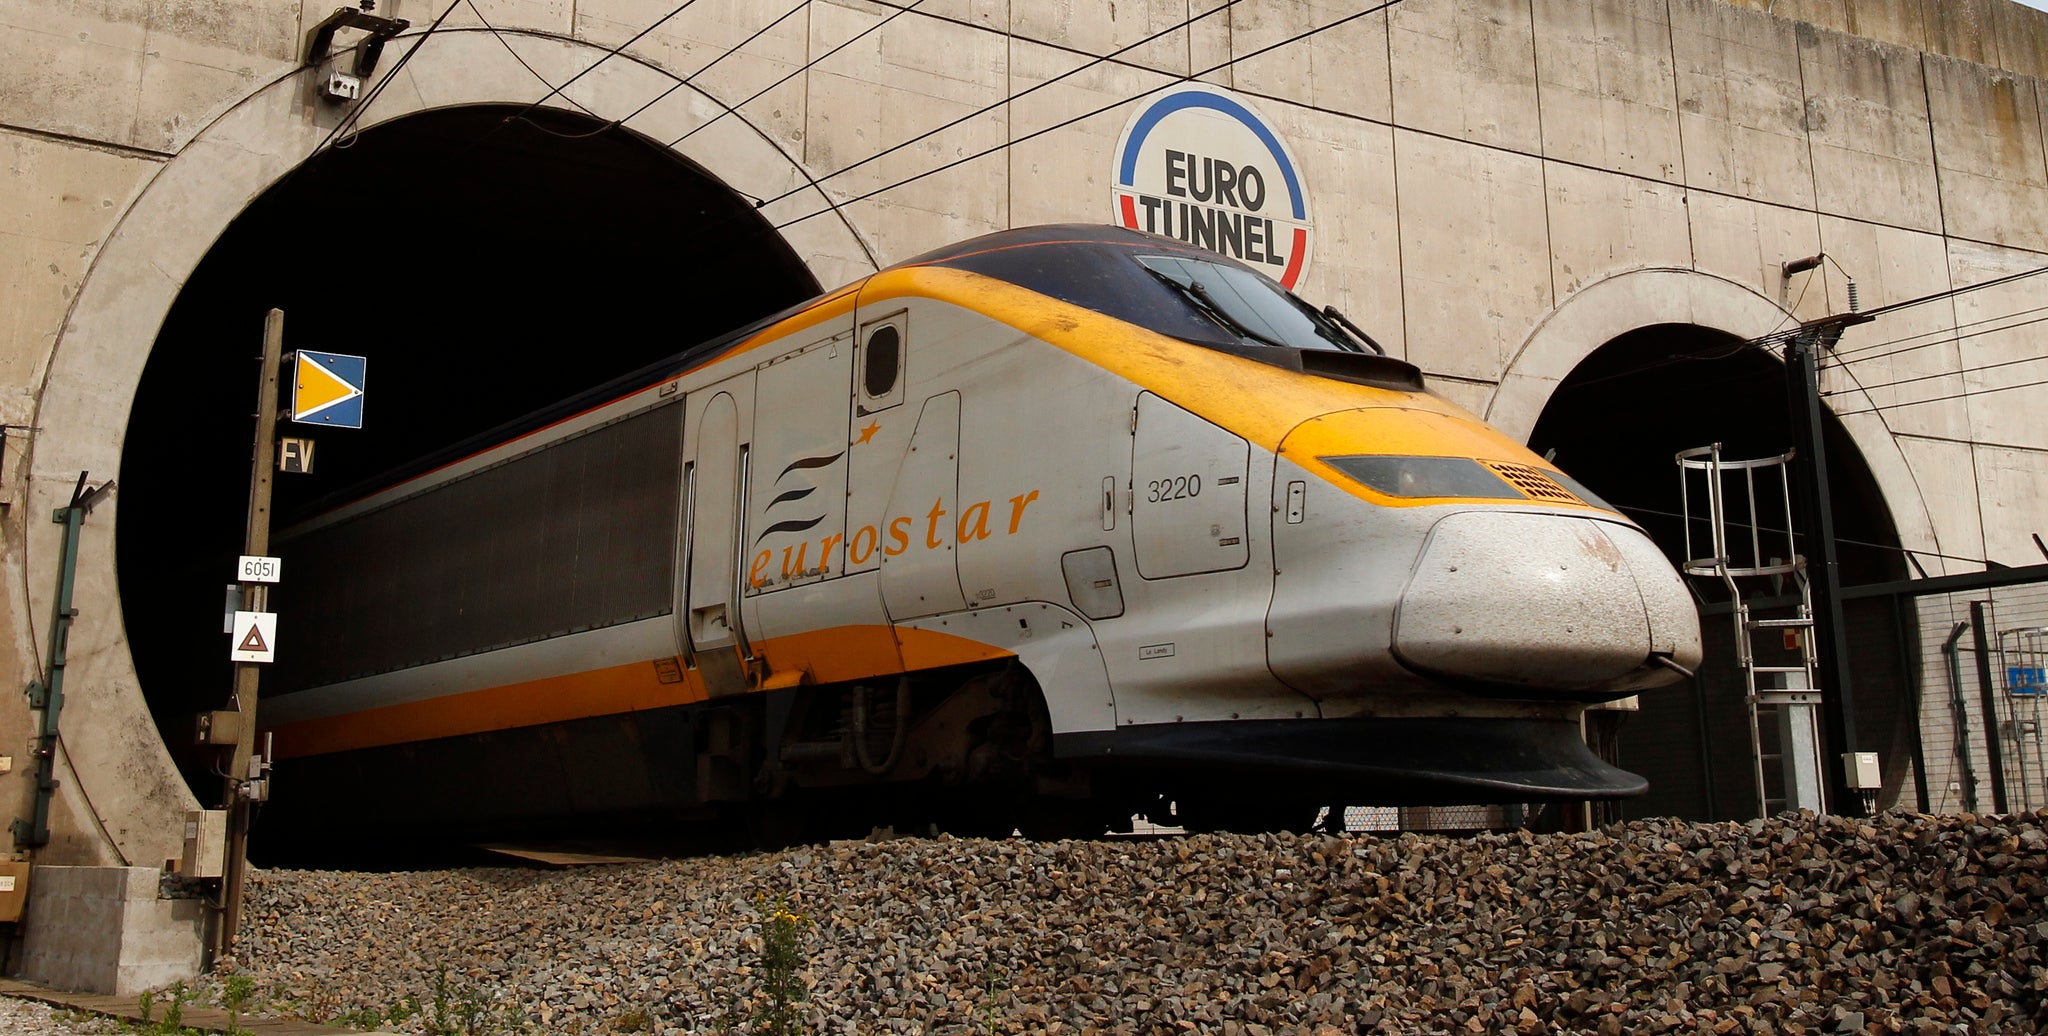 Eurostar has slashed its timetables during the pandemic